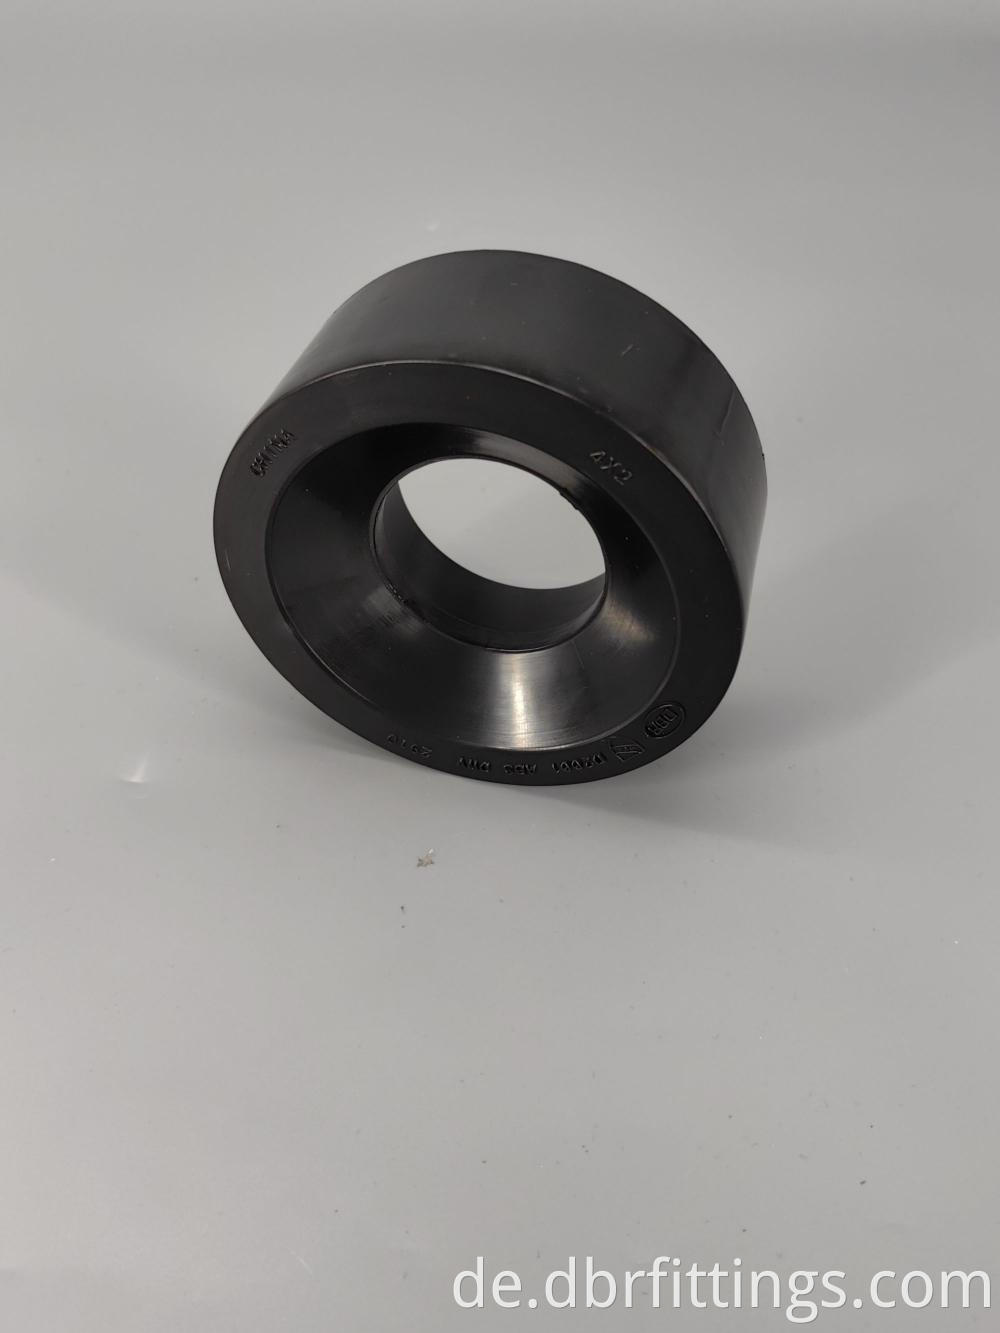 FLUSH BUSHING ABS fittings for sewage system